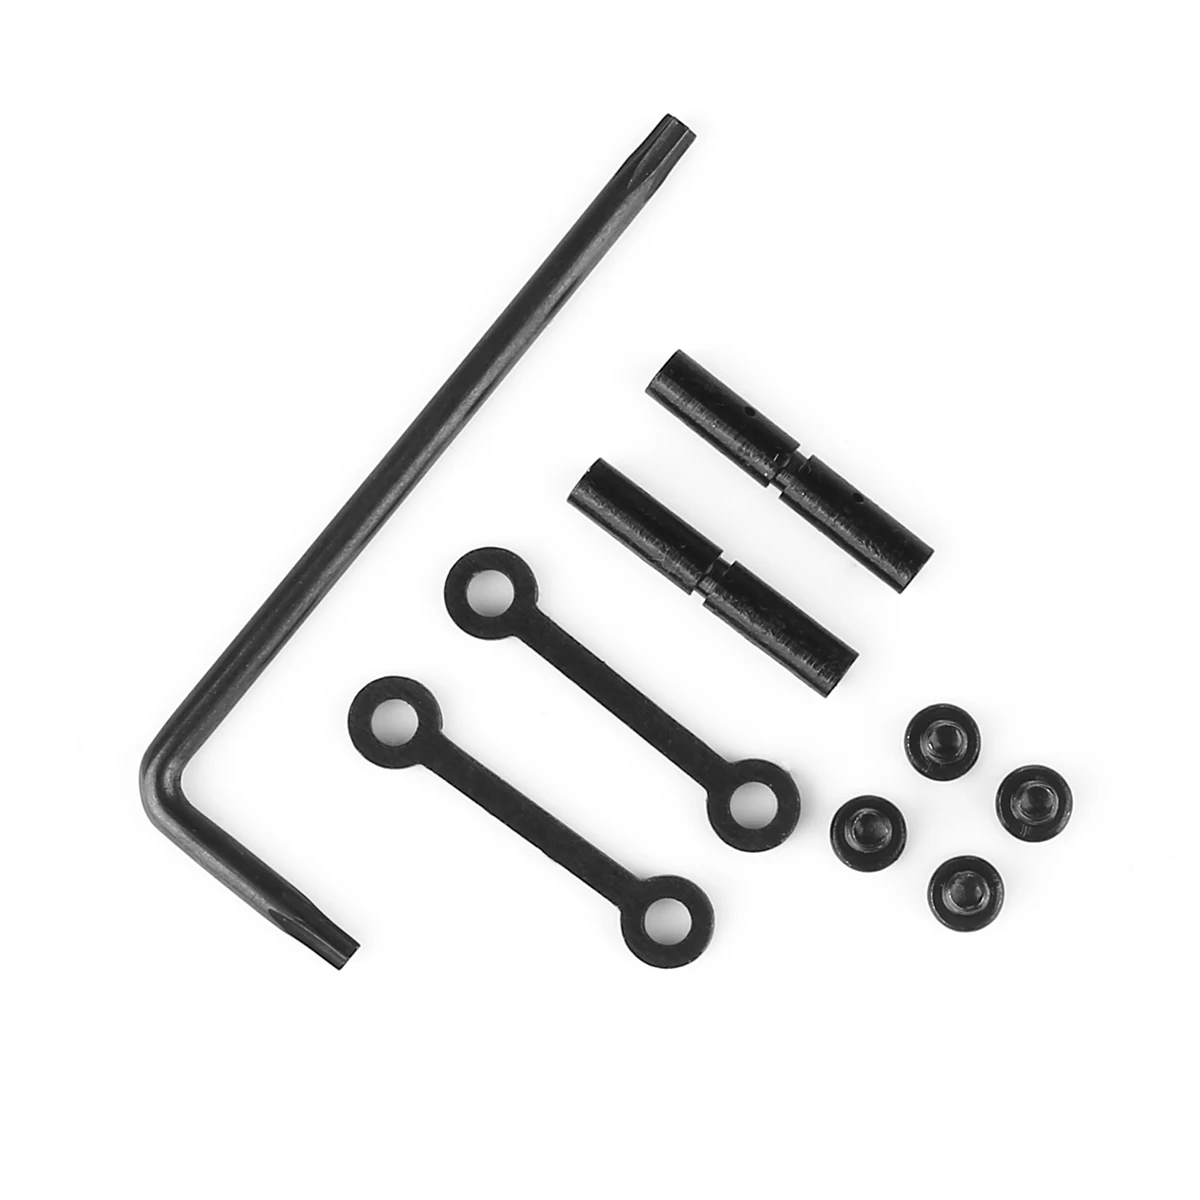 

MAGORUI Tactical .223 .308 Anti Walk Rotation Pins Side Plates Trigger Hammer Pins for M4 AR15 M16 Hunting Airsoft Rifle Accesso